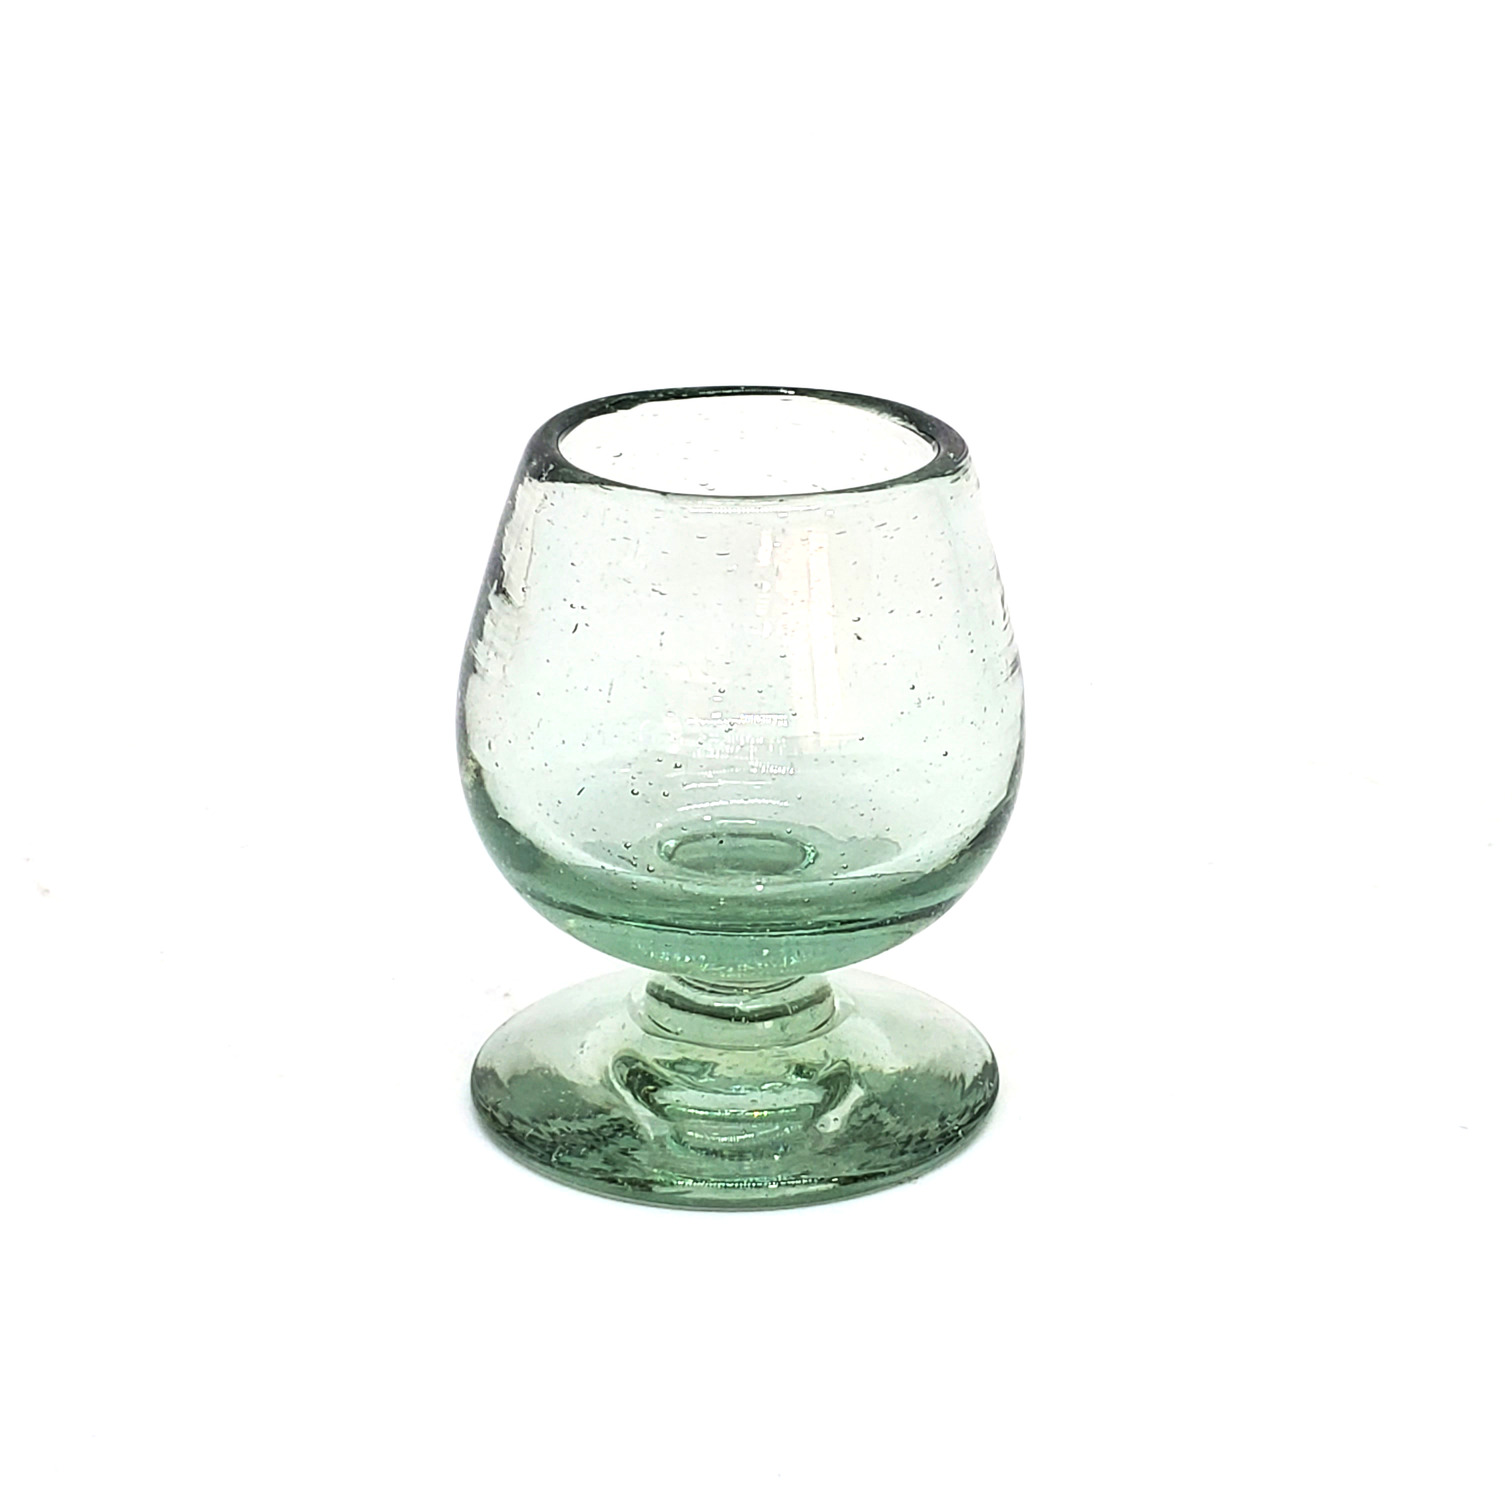 Wholesale Tequila Shot Glasses / Clear Tequila Sippers  / Sip your favourite tequila or mezcal with these iconic clear handcrafted sipping glasses. You may also serve lemon juice or other chasers.